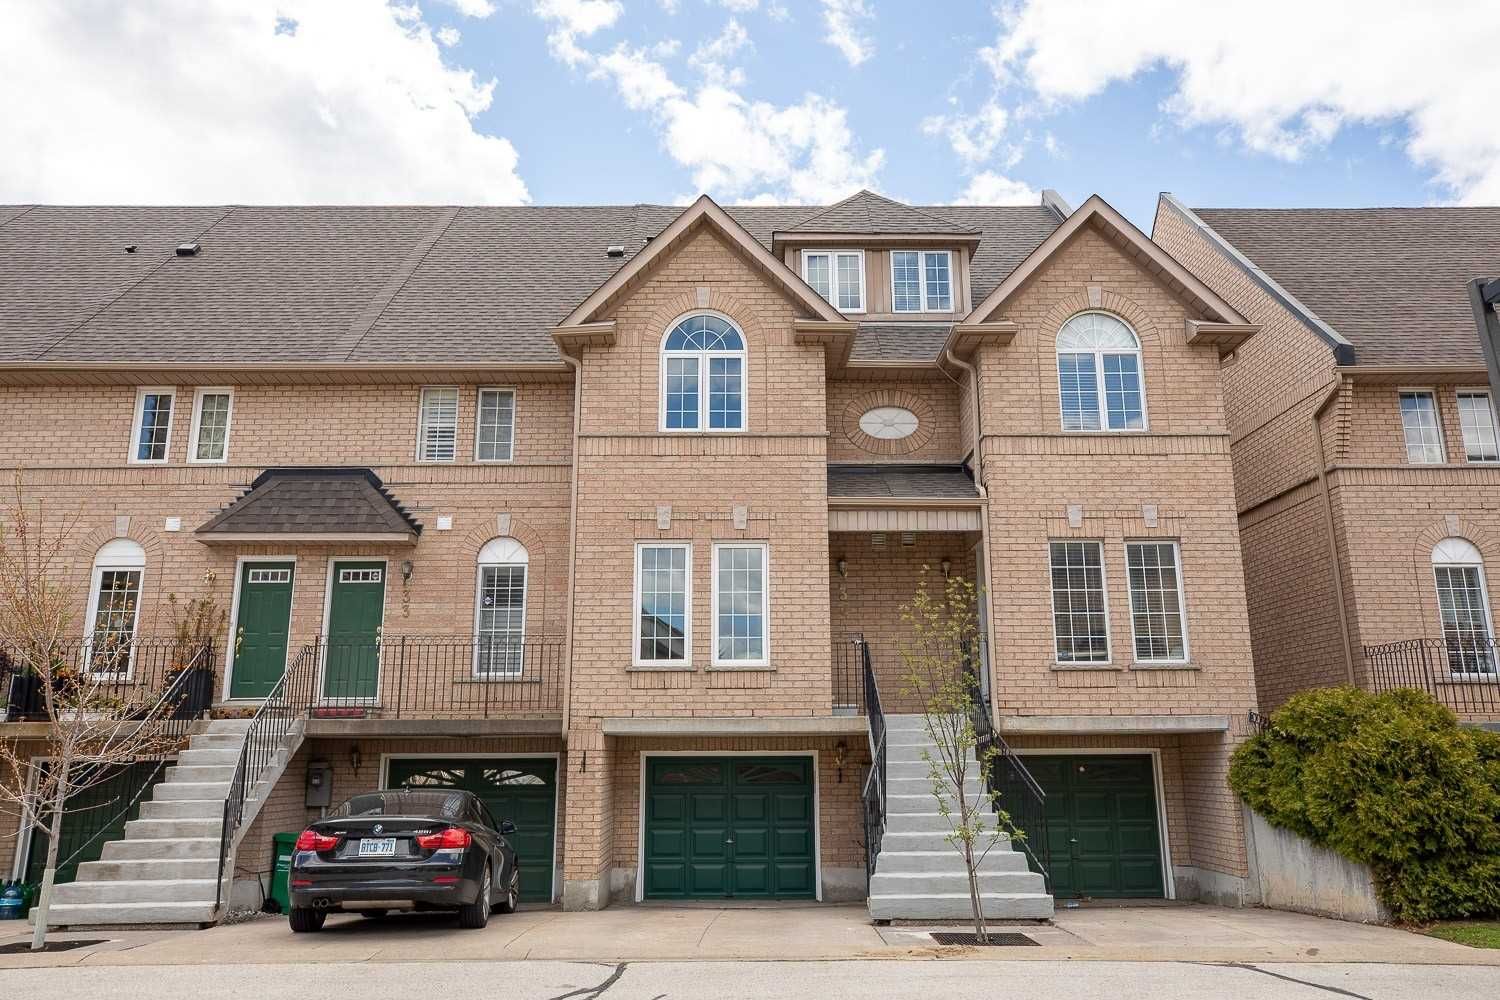 80 Strathaven Drive. 80 Strathaven Drive Townhomes is located in  Mississauga, Toronto - image #1 of 2